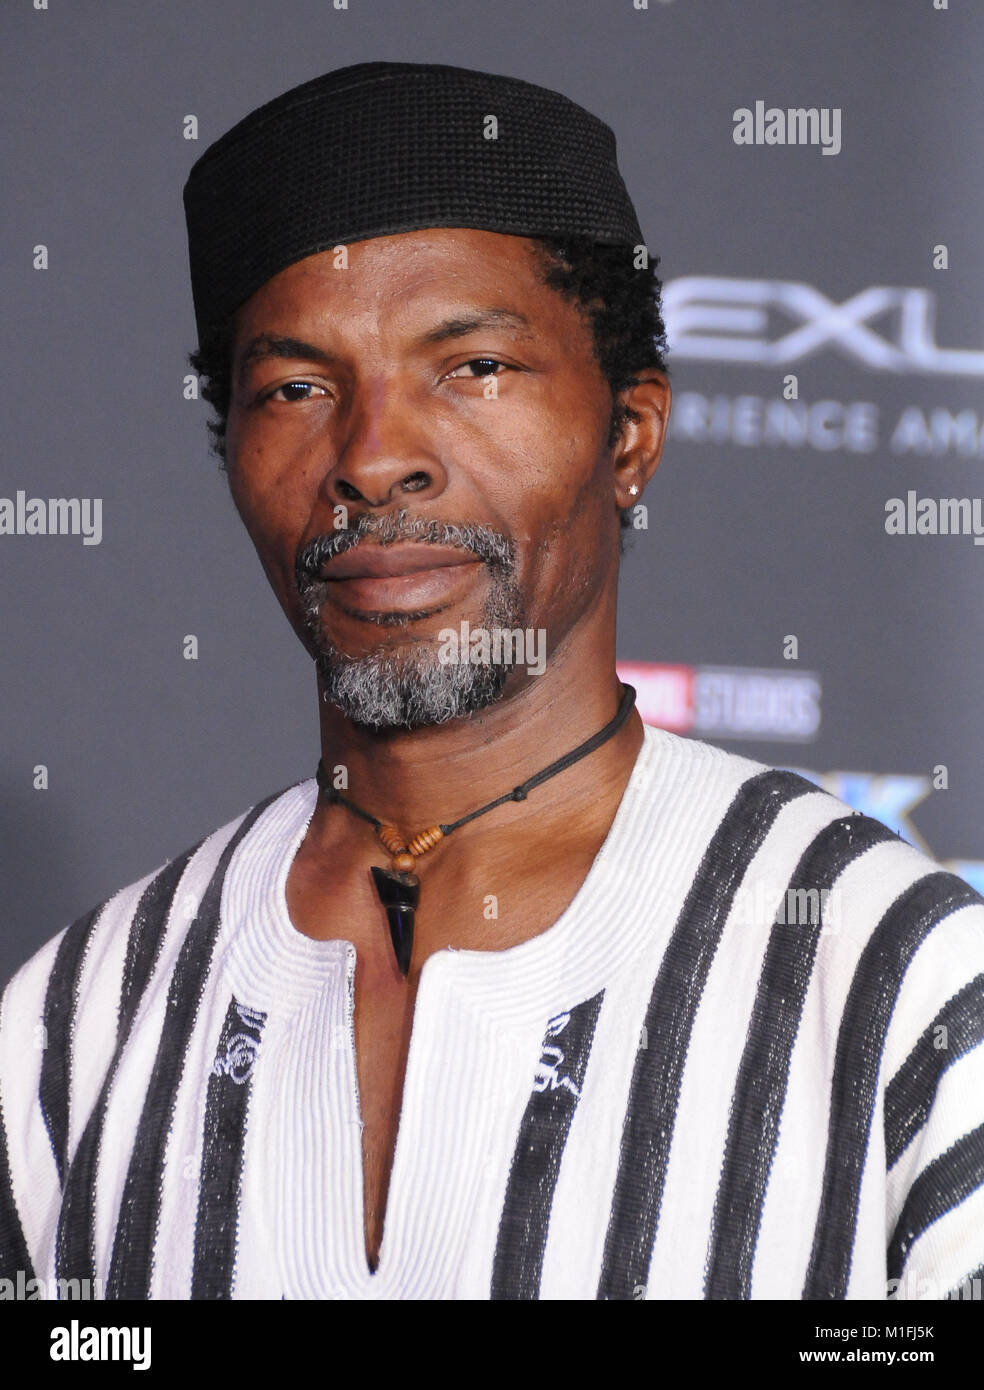 Los Angeles, California, USA. 29th Jan, 2018. Actor Isaach de Bankole attends the World Premiere of Marvel Studios' 'Black Panther' at Dolby Theatre on January 29, 2018 in Los Angeles, California. Photo by Barry King/Alamy Live News Stock Photo